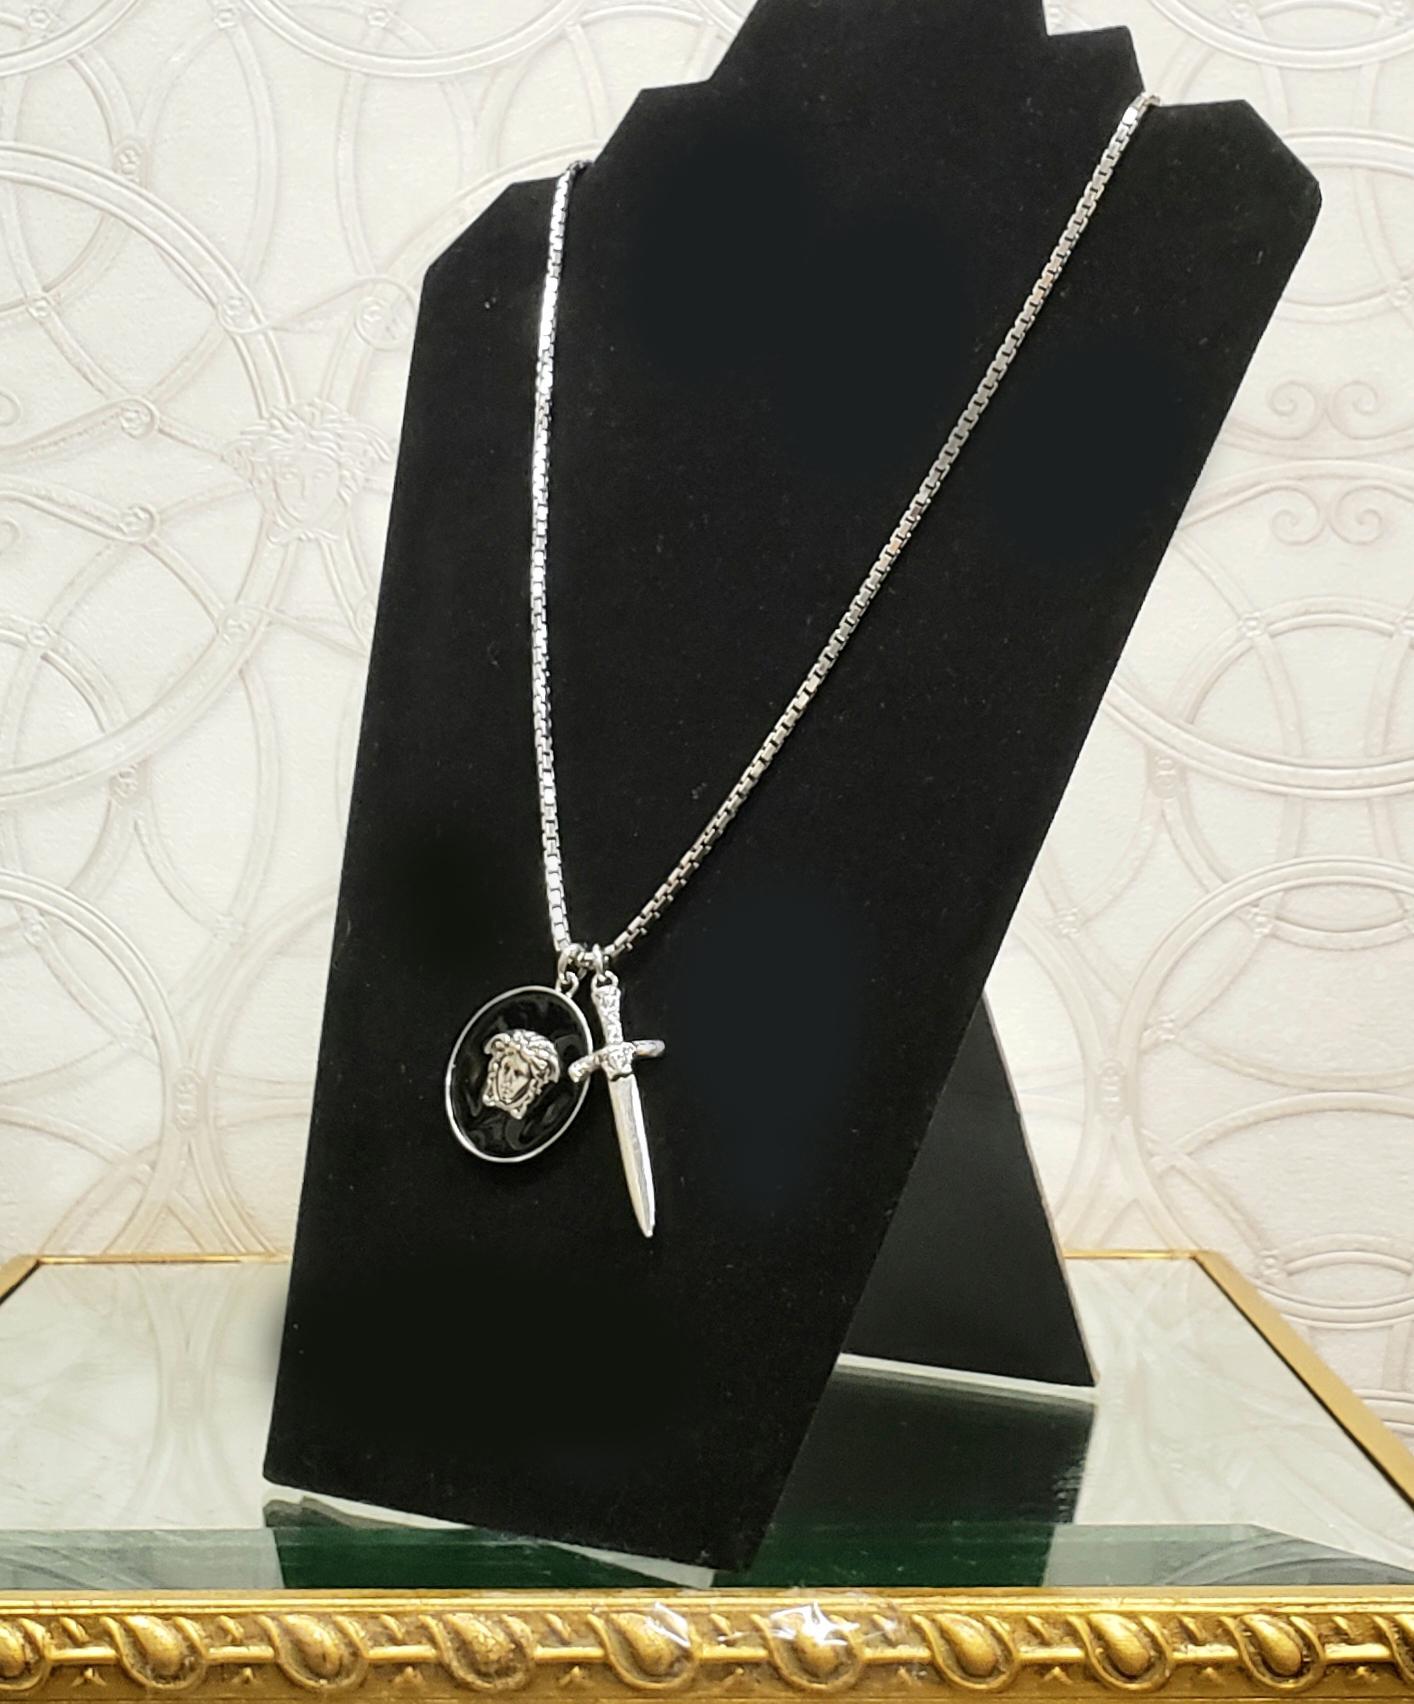 Women's or Men's Spring 2011 L# 5 NEW VERSACE SILVER TONE METAL MEDUSA and DAGGER NECKLACE For Sale